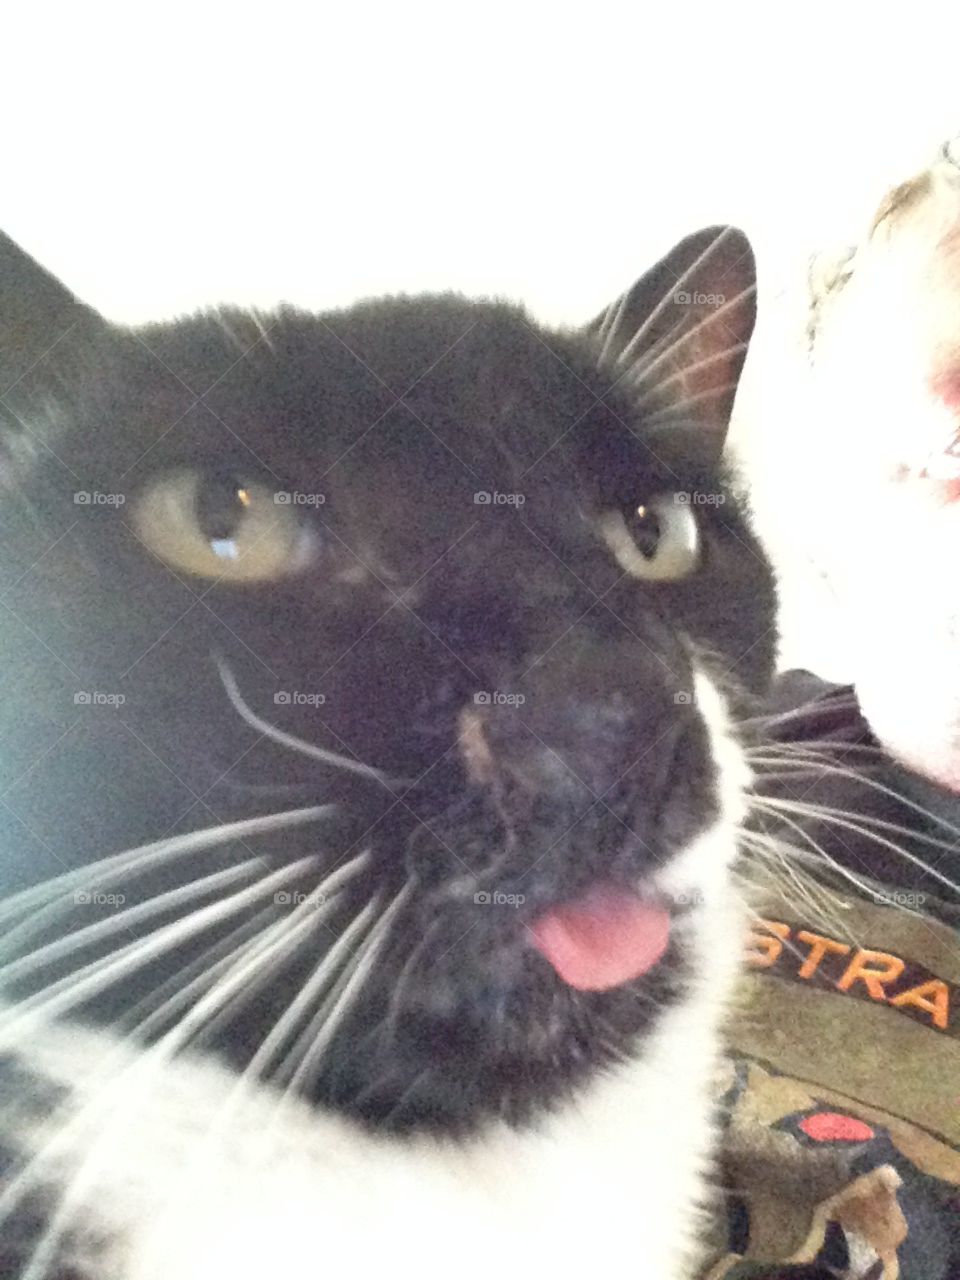 Molly, our kitty, looking silly with her tongue stuck out 